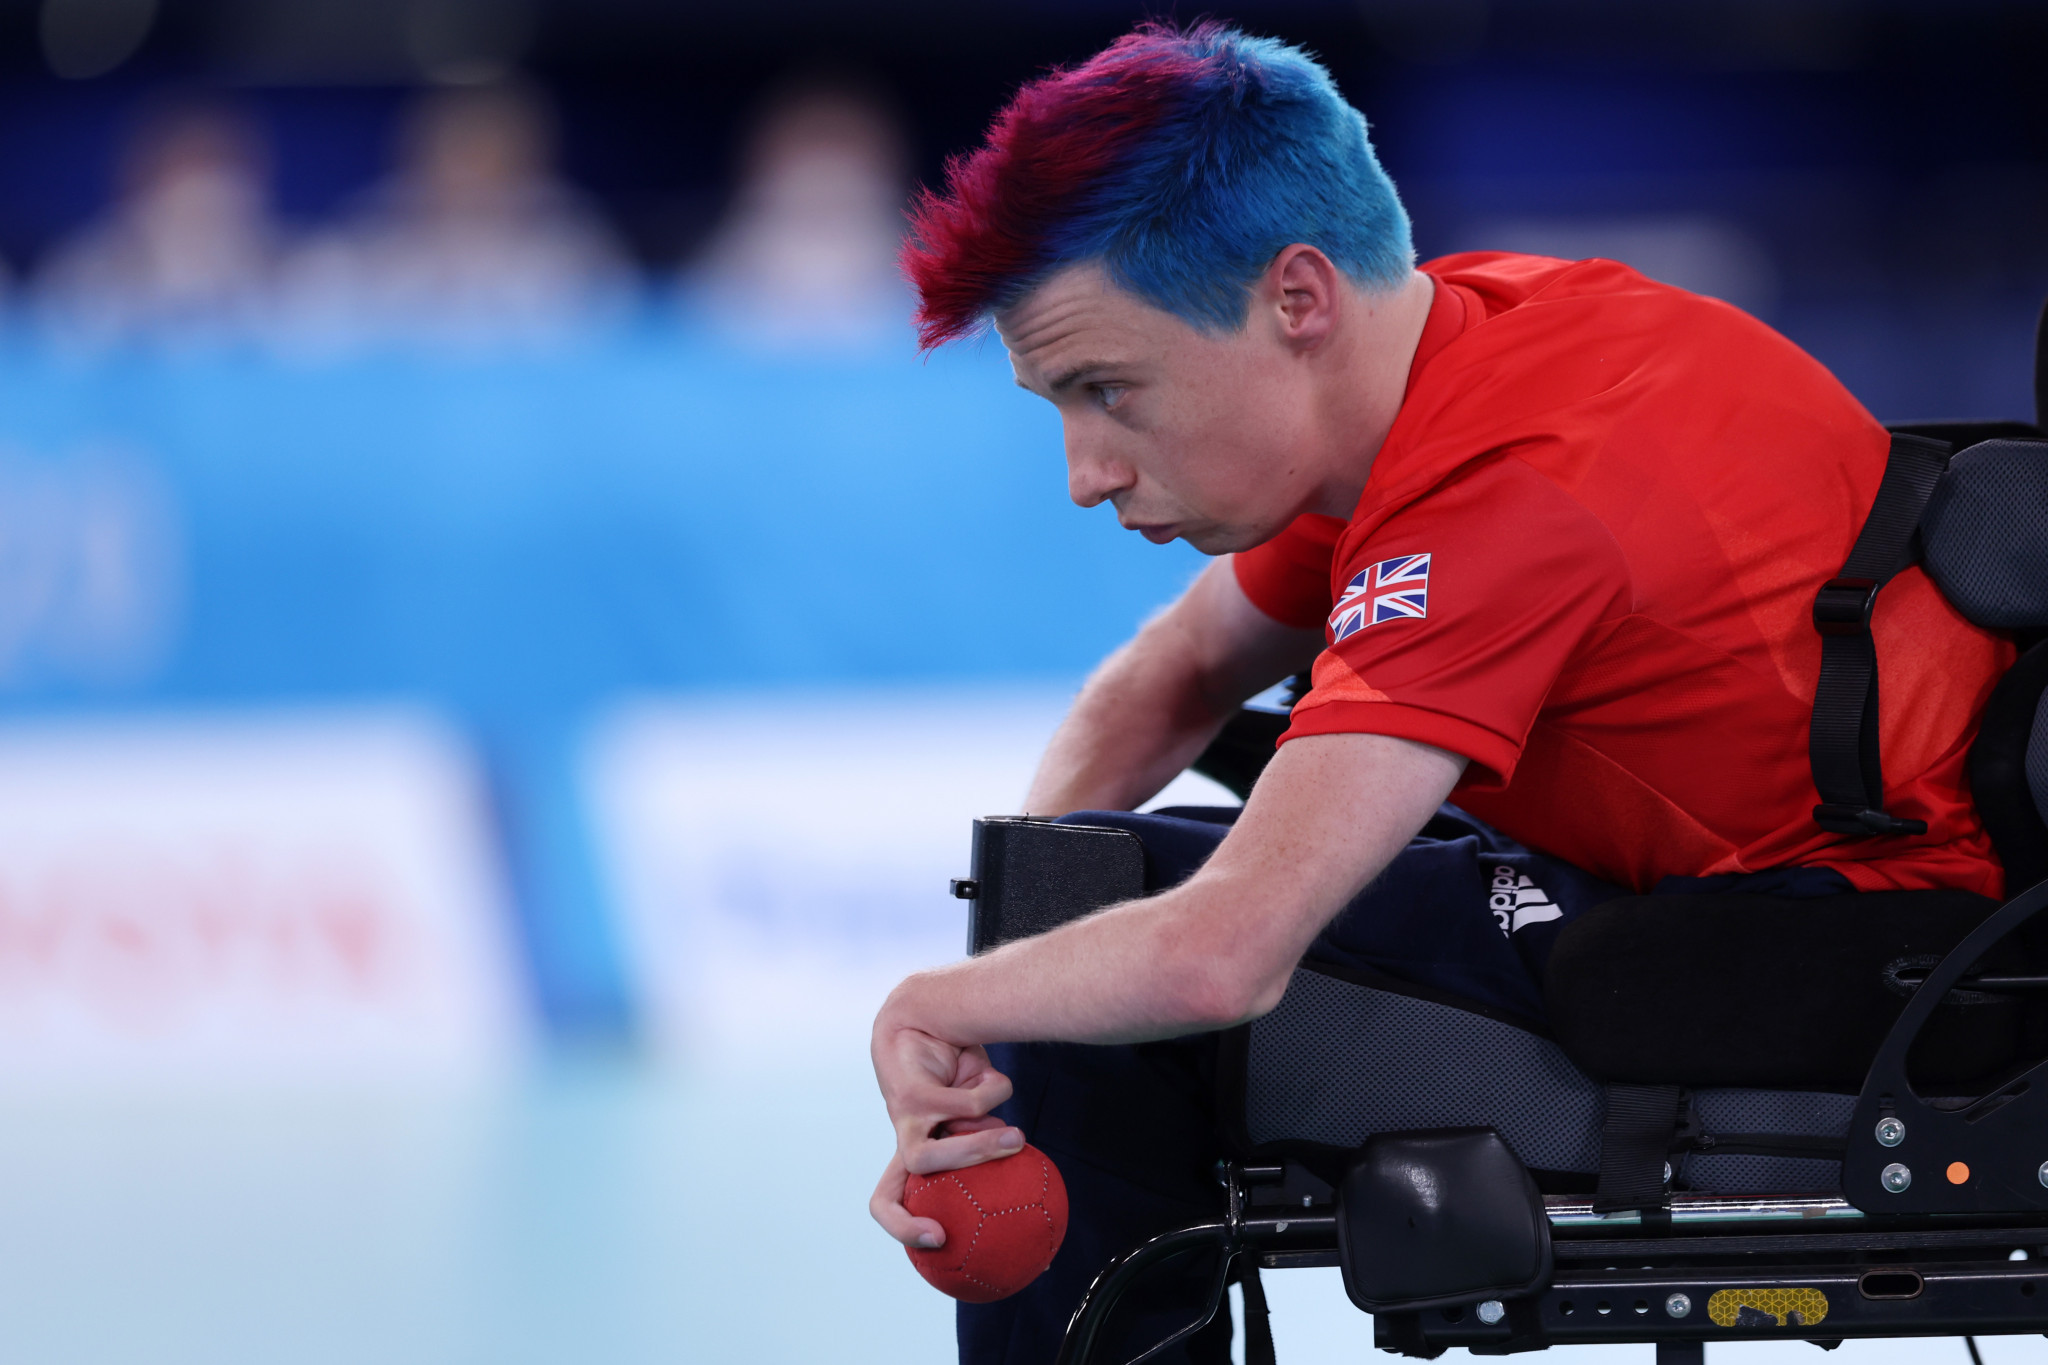 David Smith is returning to the World Boccia Championships to defend his title ©Getty Images